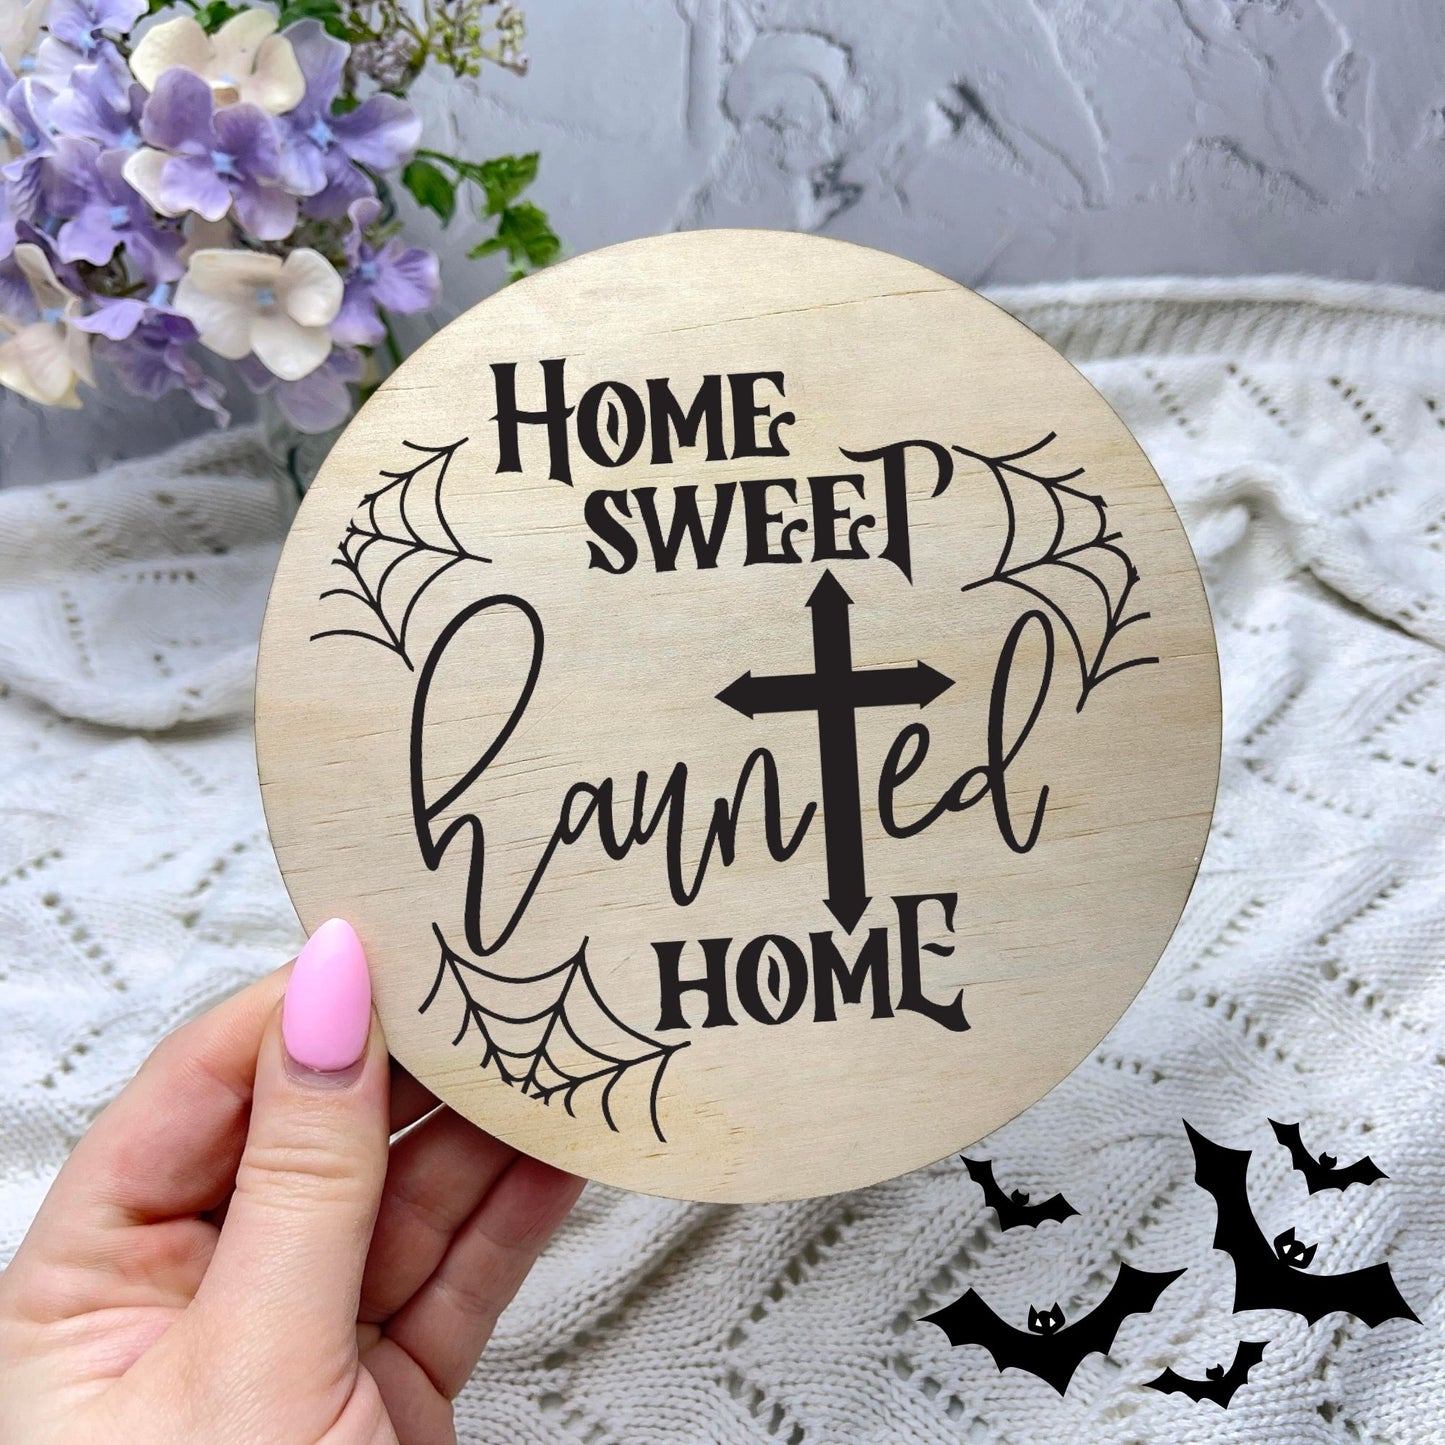 Home sweet haunted home sign, Halloween Decor, Spooky Vibes, hocus pocus sign, trick or treat decor, haunted house h33